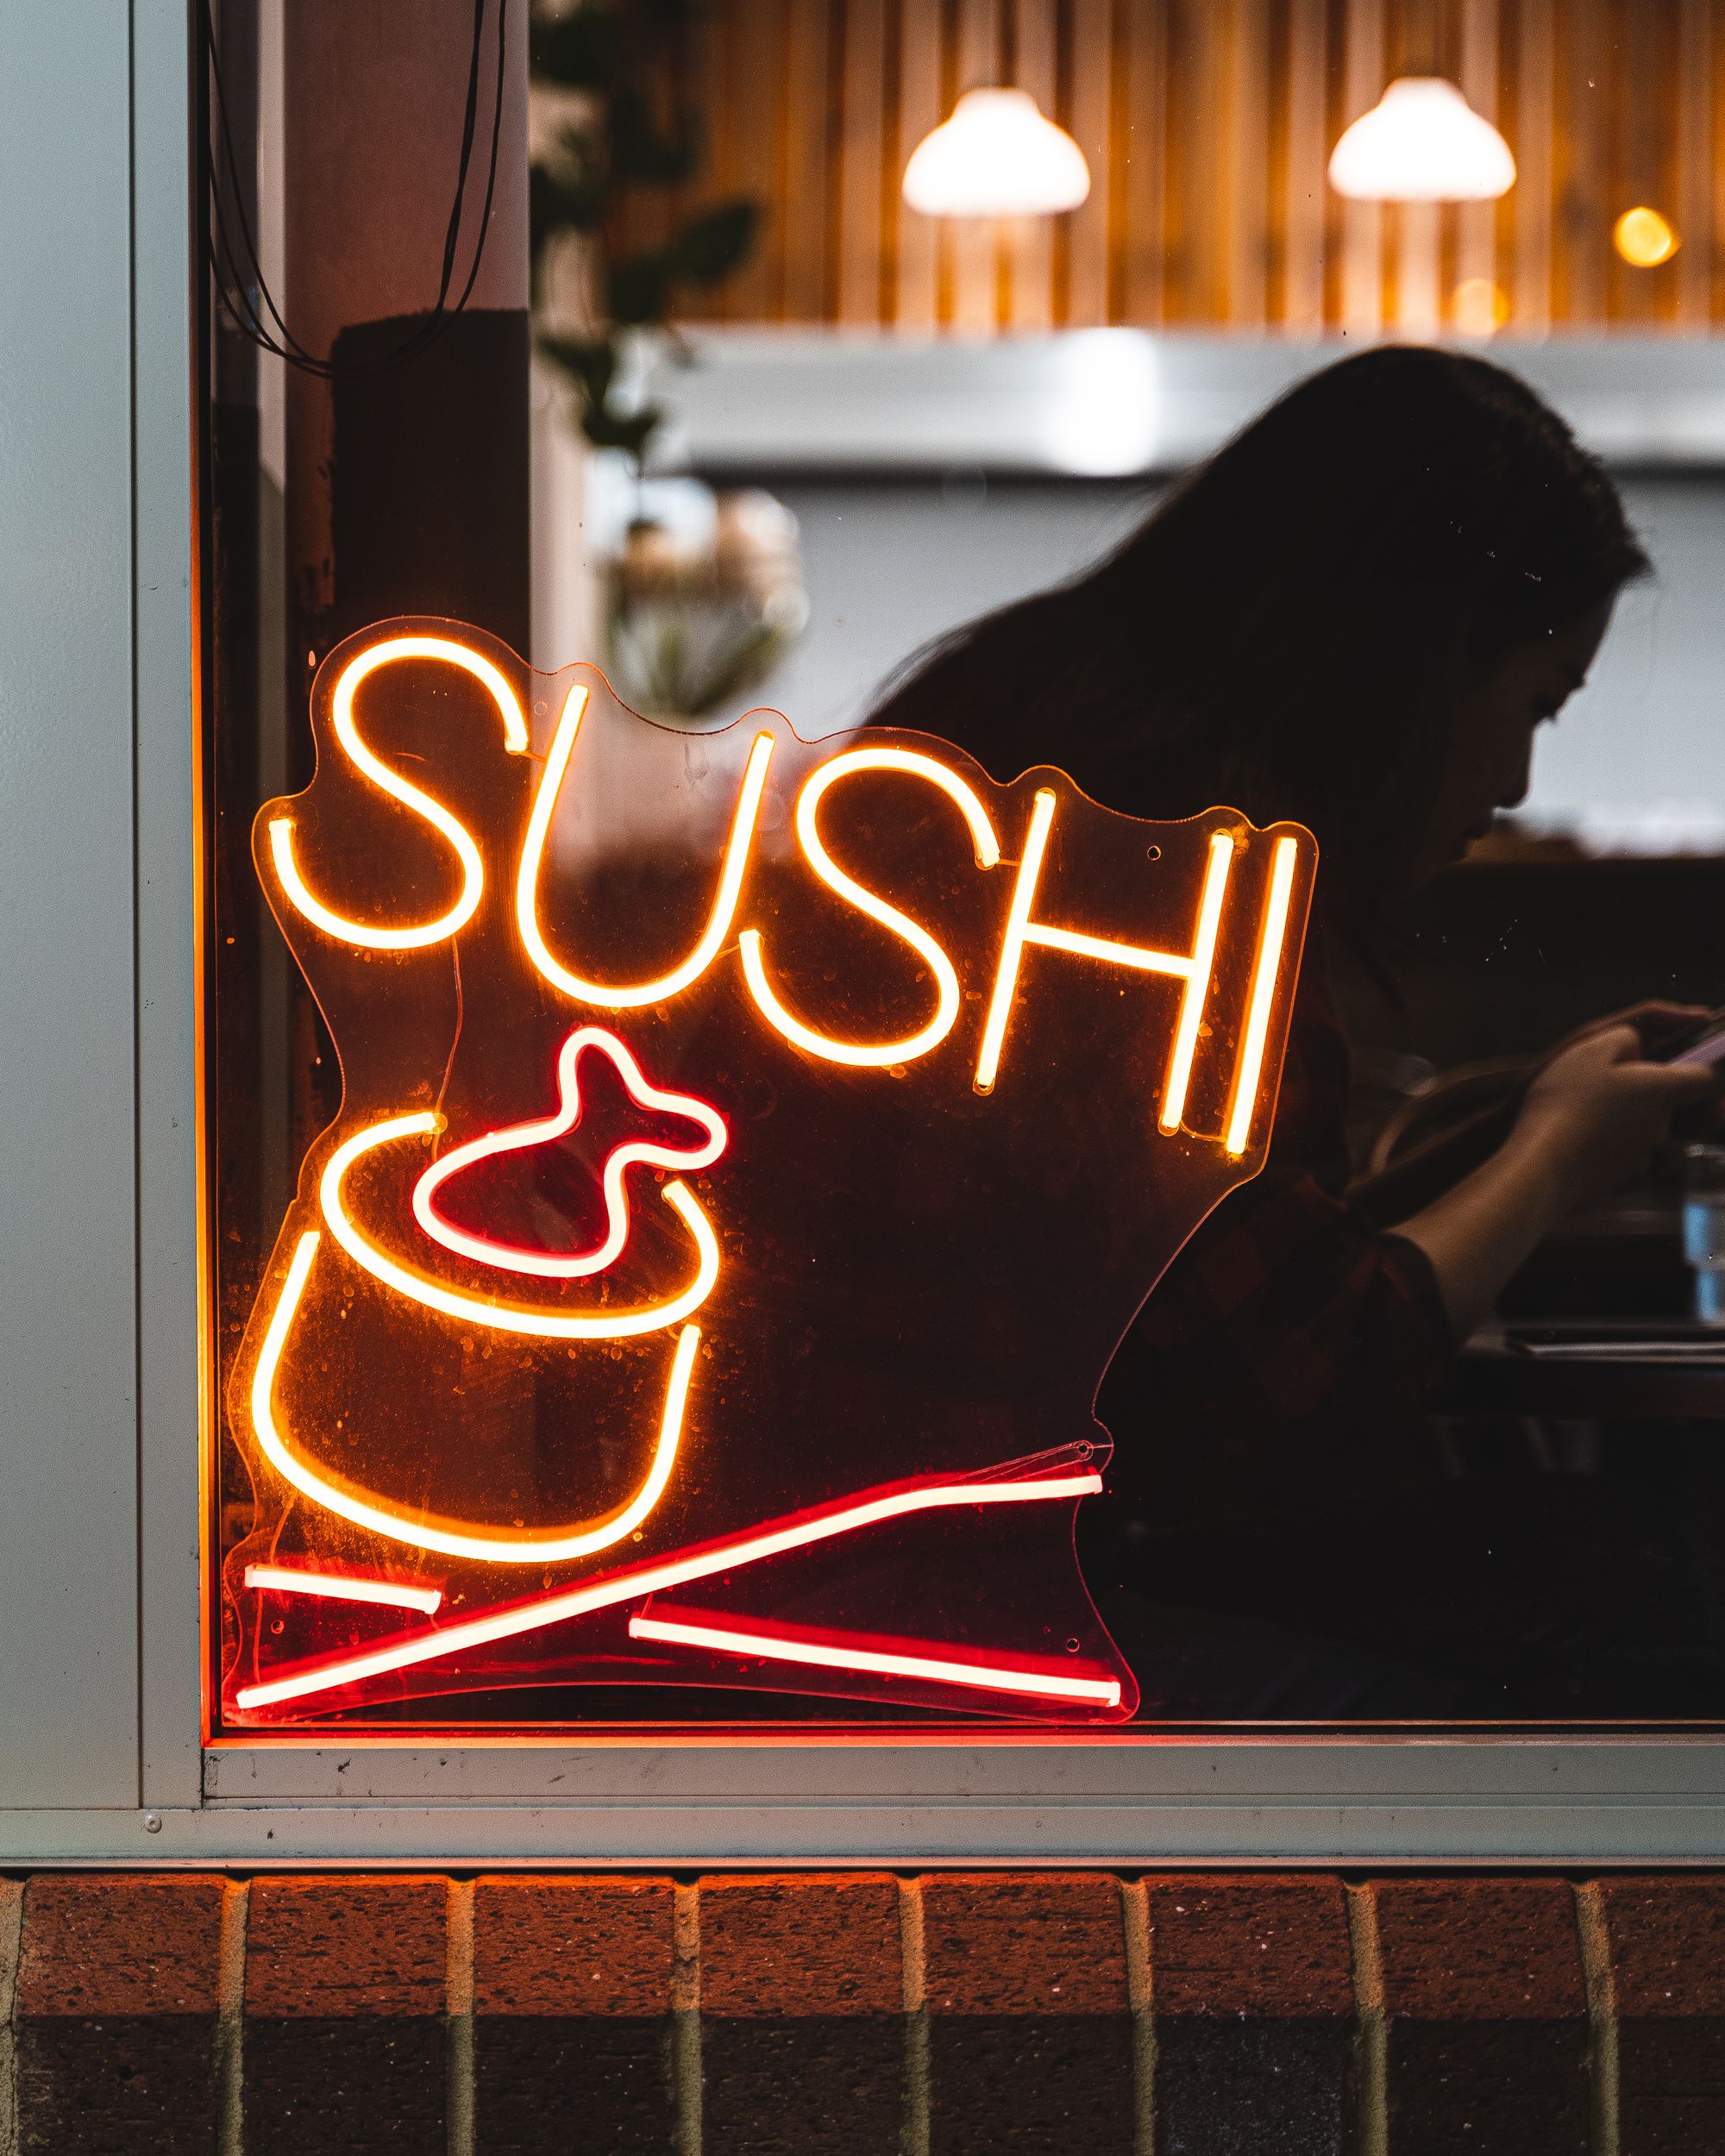 A neon lit sign that says "sushi" showing a maki roll with a fish sticking out and chopsticks underneath it